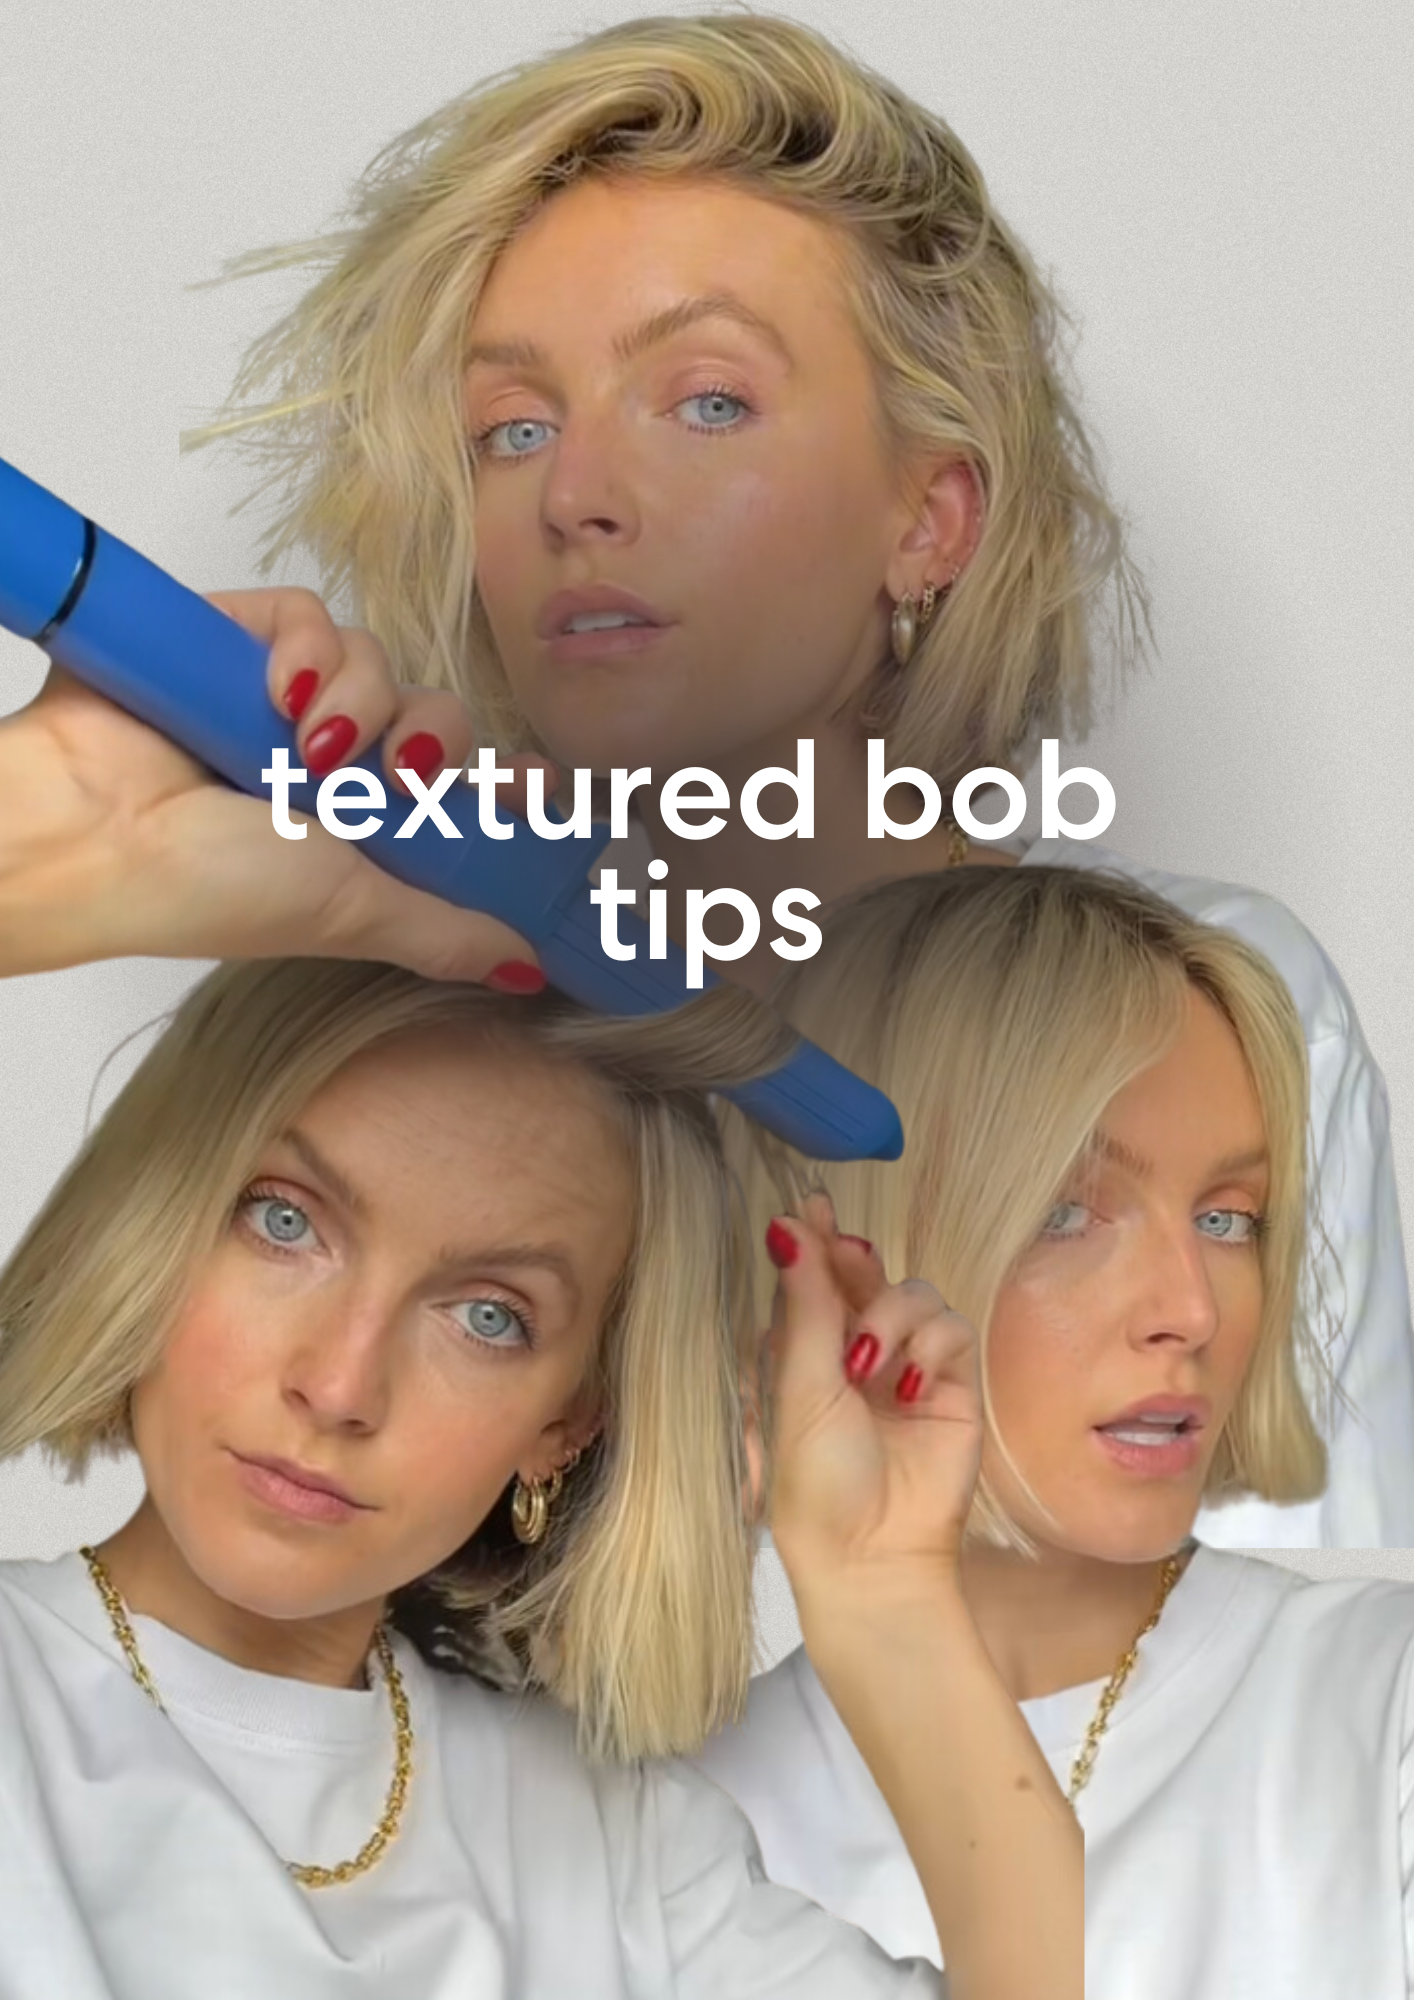 How to achieve the perfect textured bob